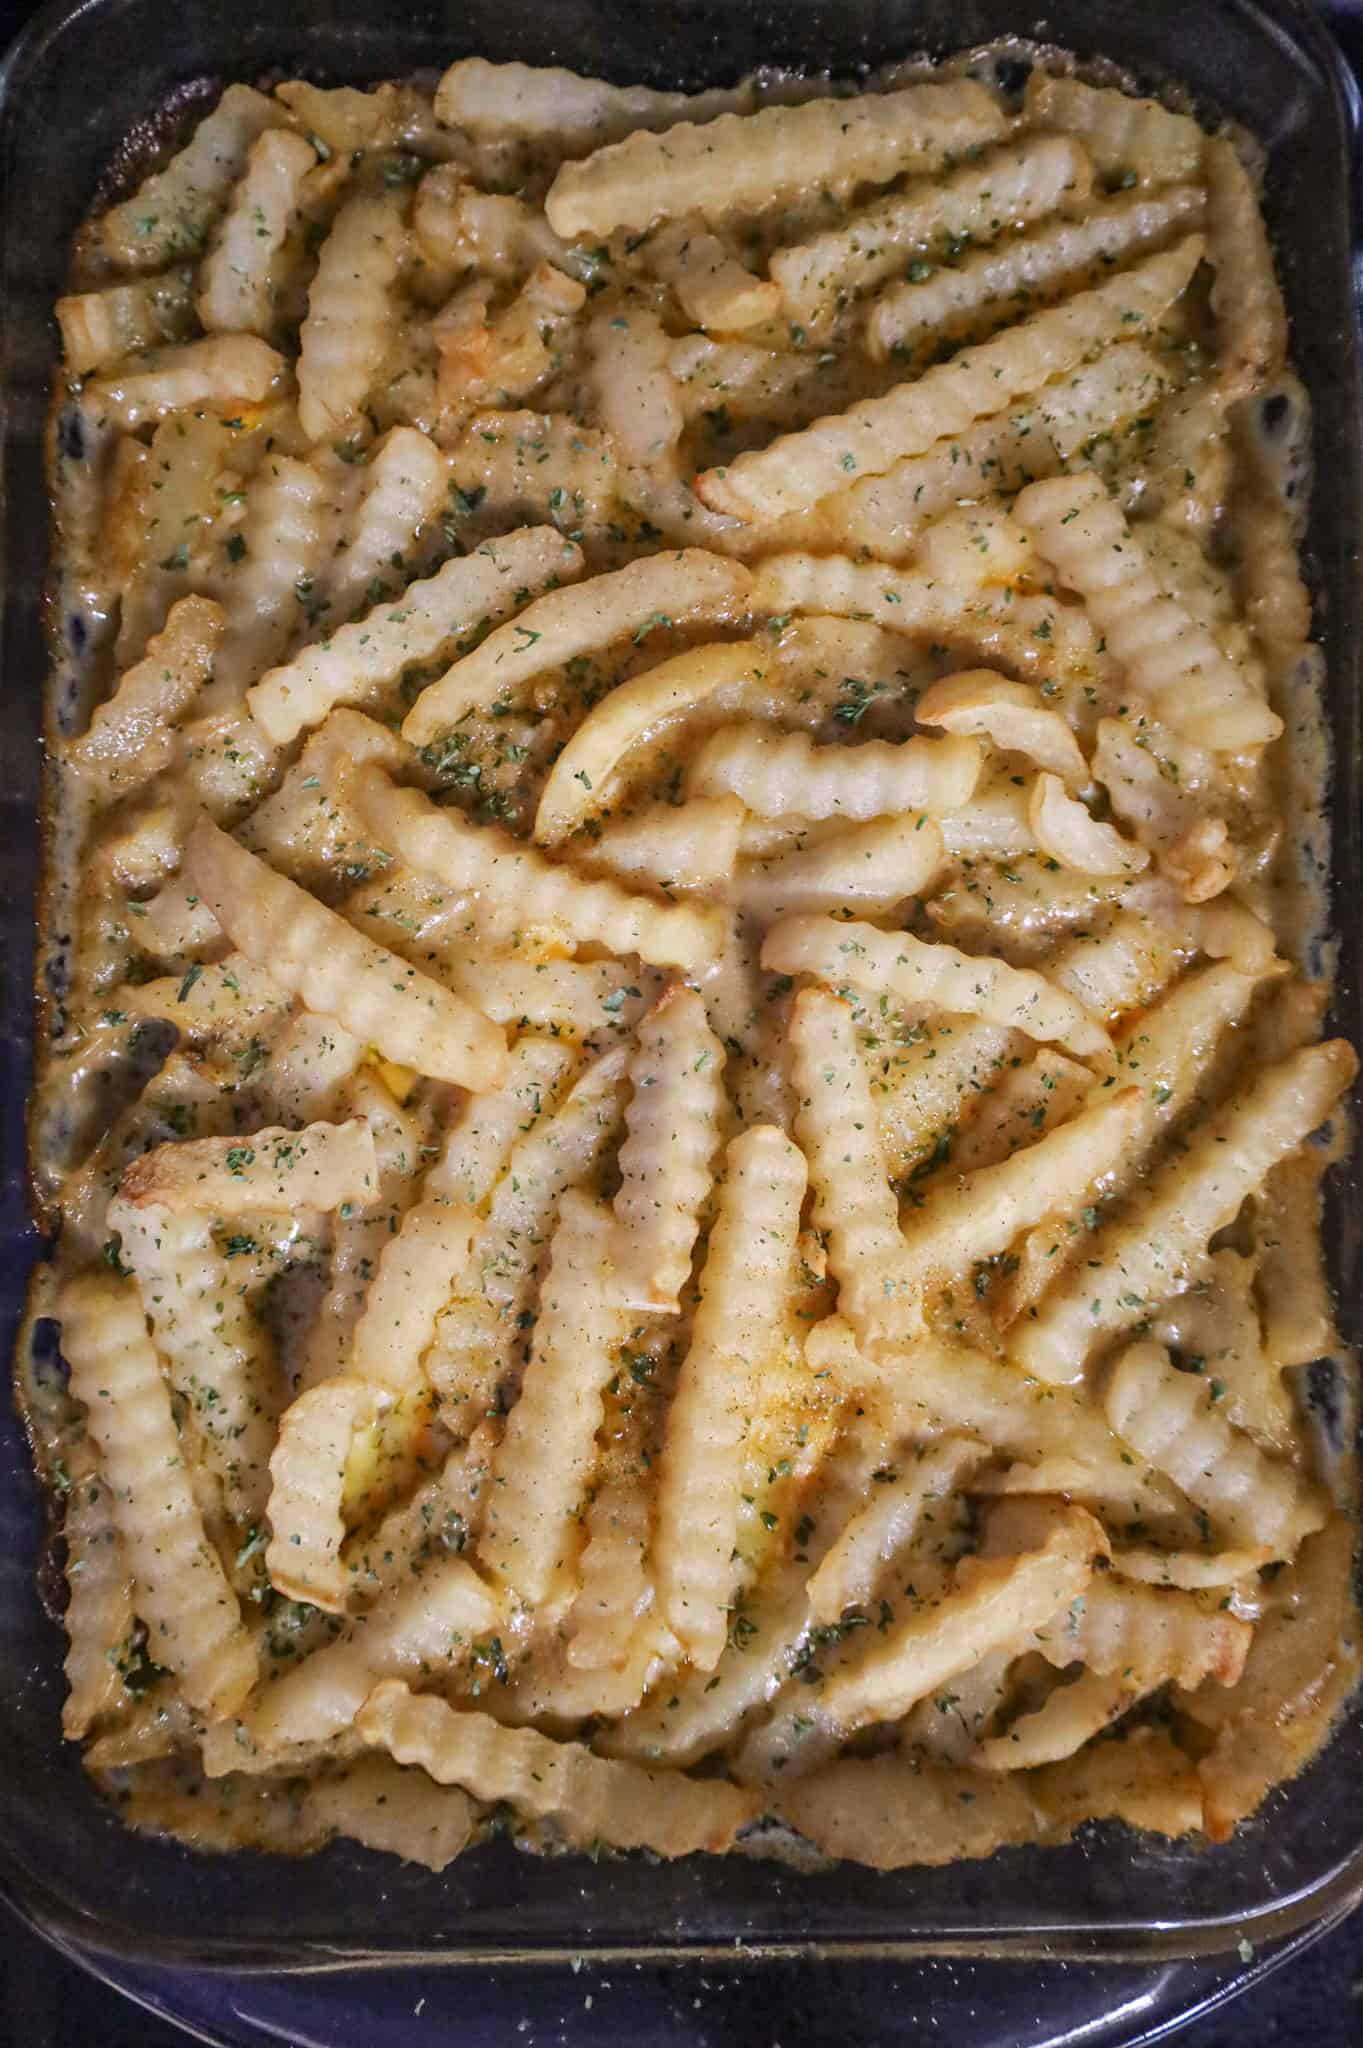 parsley and seasoned salt sprinkled on top of French fry casserole